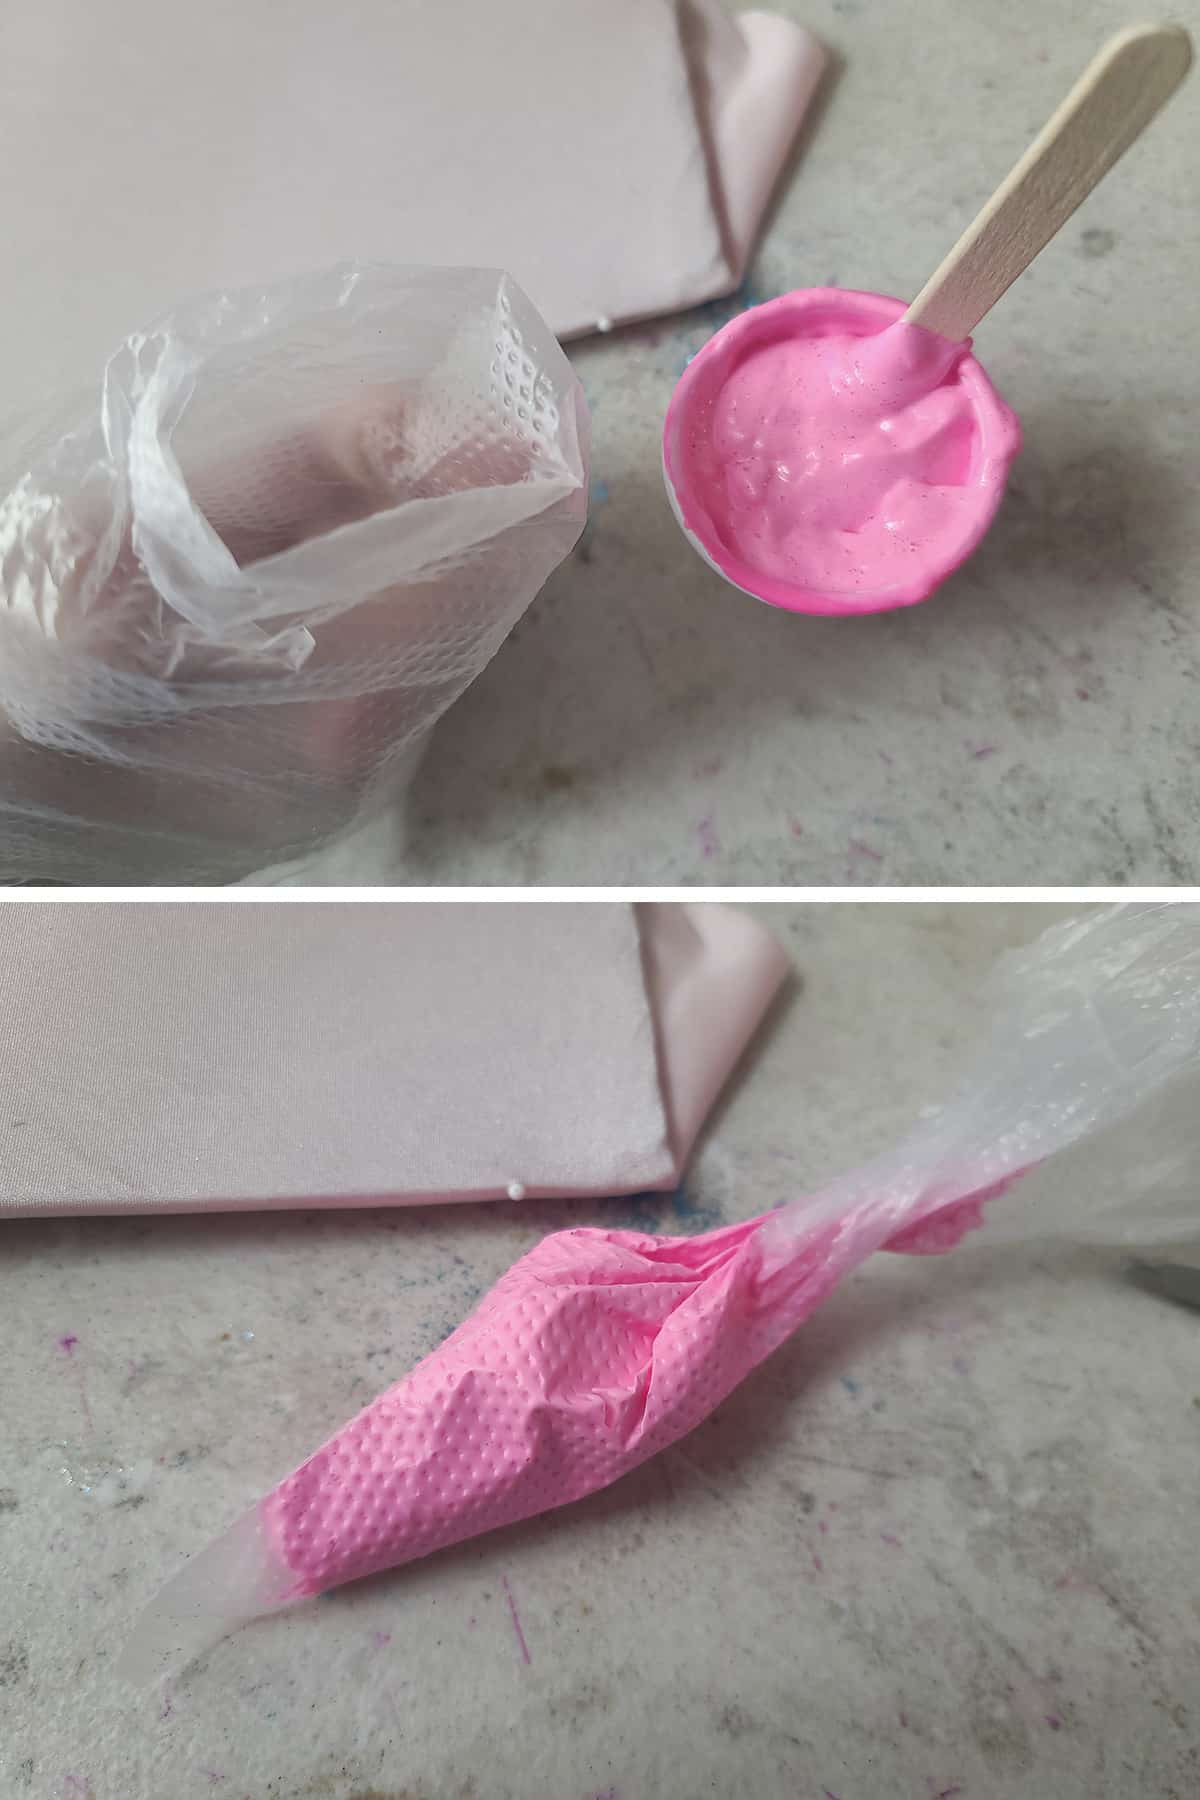 A two part compilation image showing neon pink stretch paint being transferred to a clear plastic pastry bag.